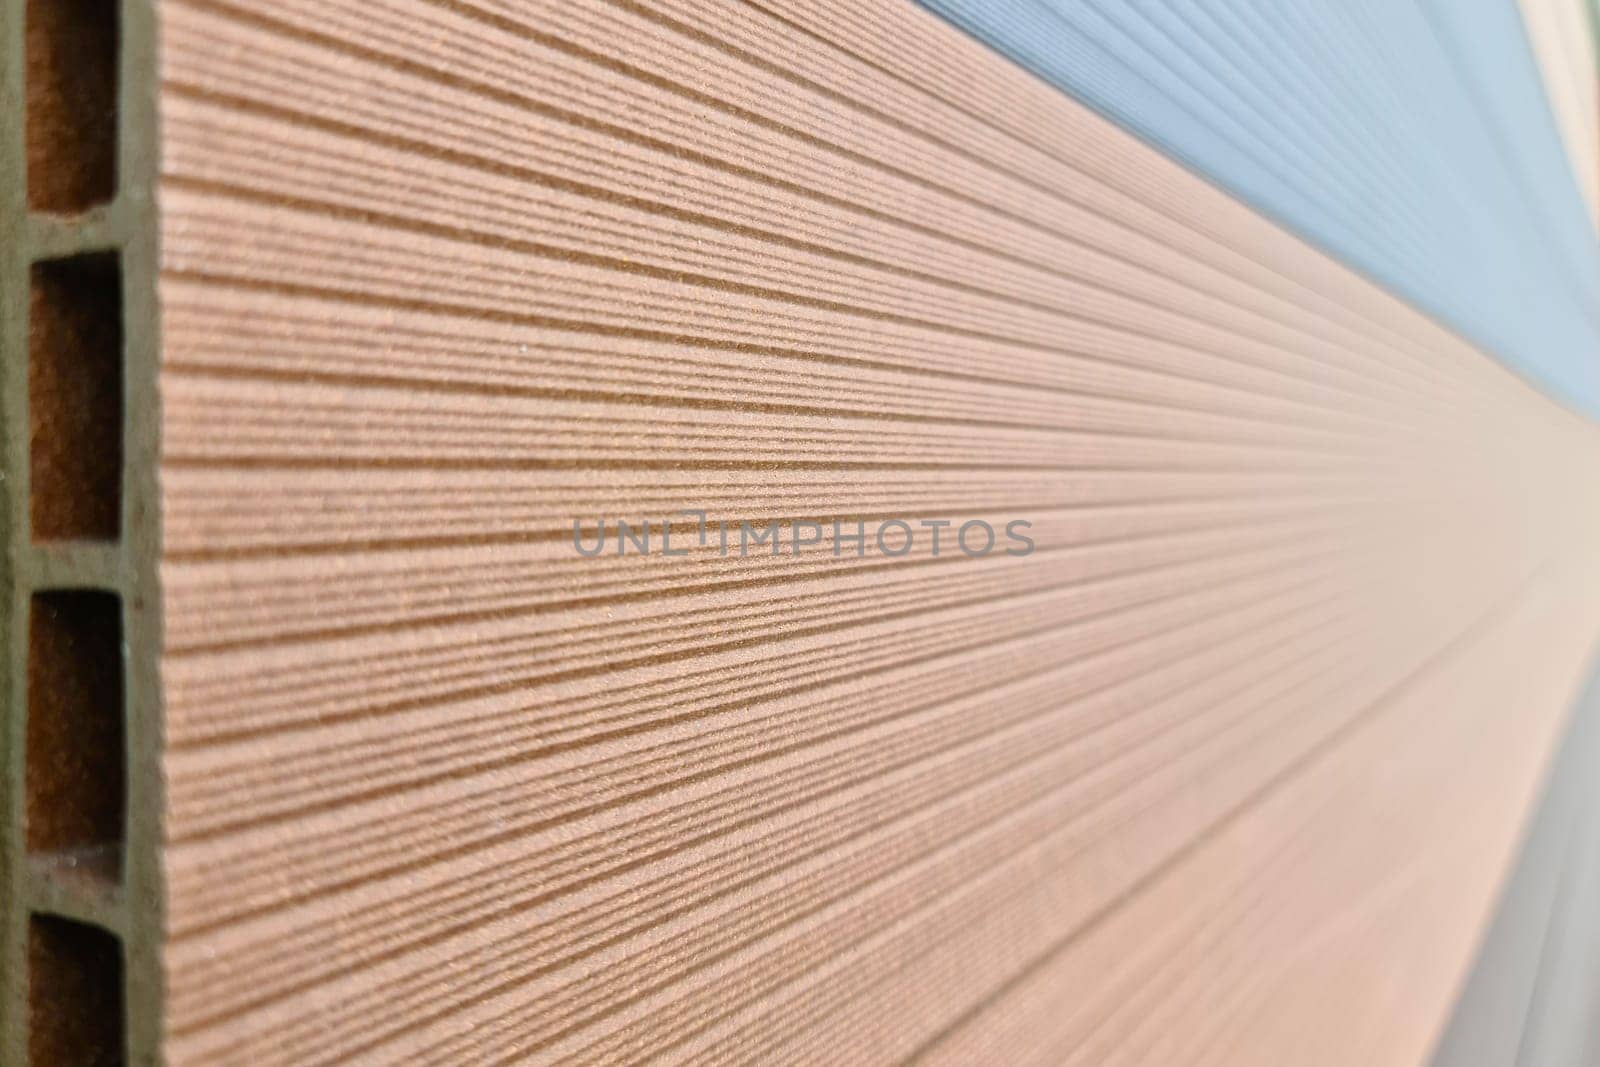 WPC terrace board, wood plastic composite decking boards in hardware store, close-up by Rom4ek